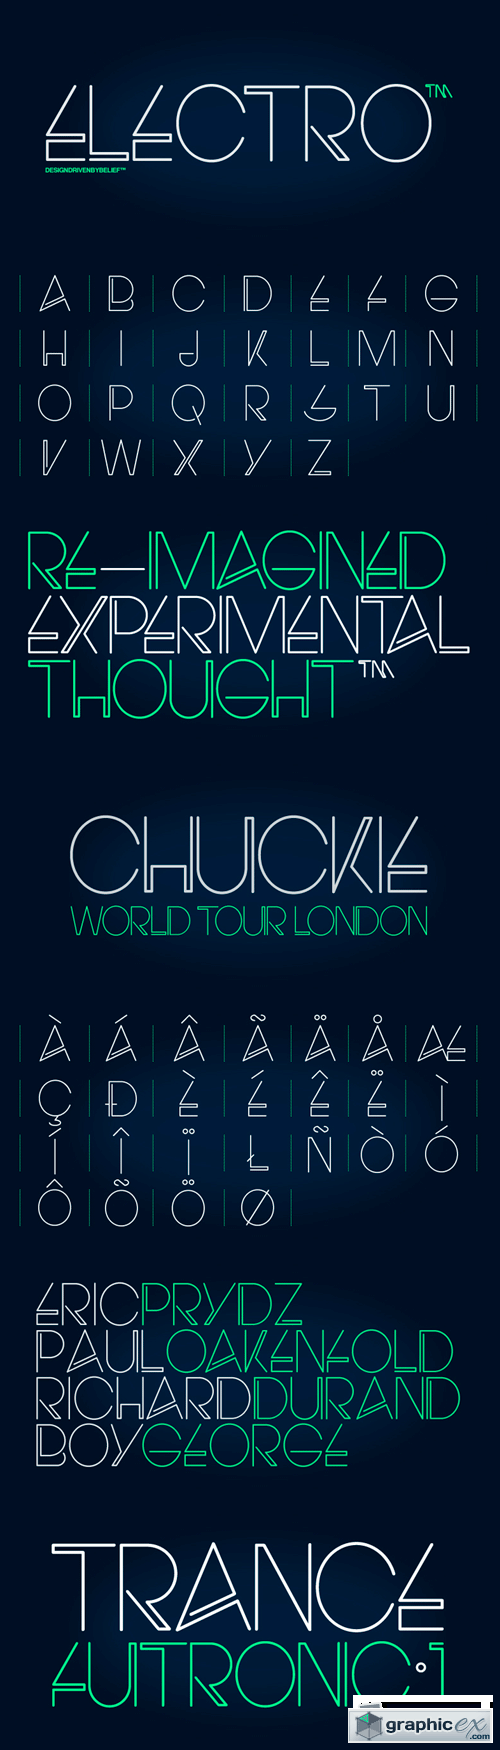 Electro Font for $25